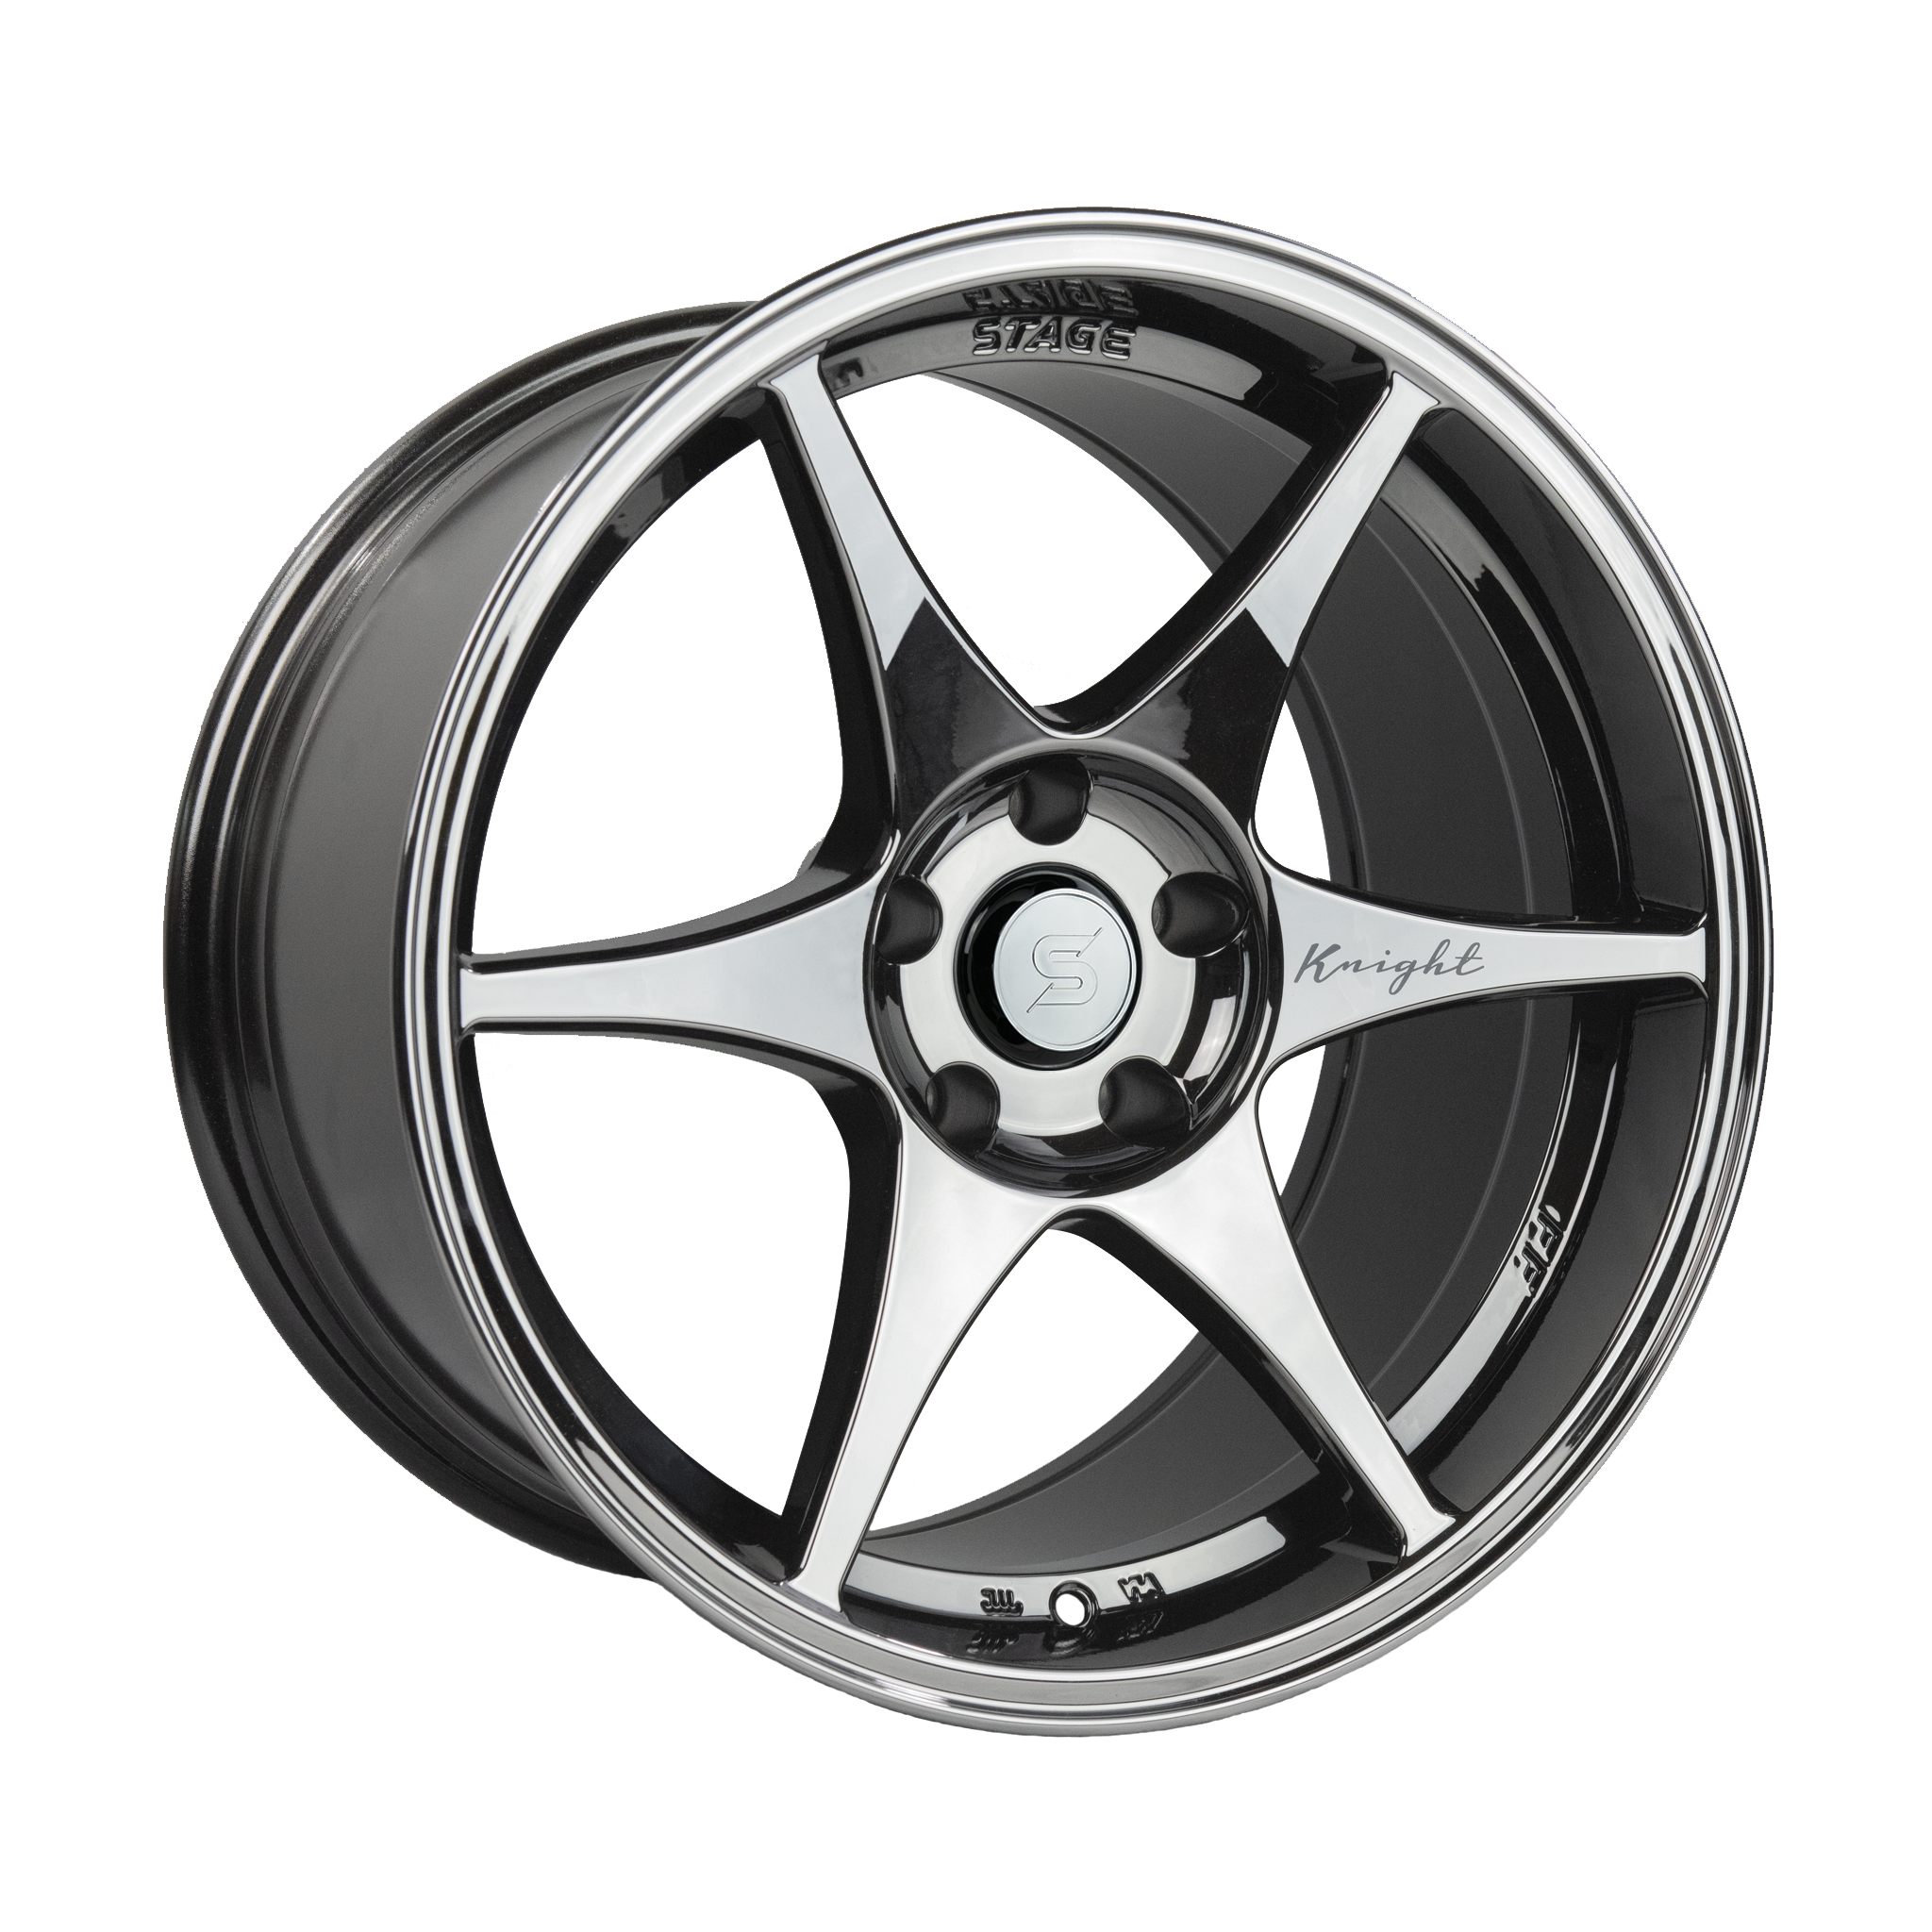 "Knight" Wheel by Stage Wheels